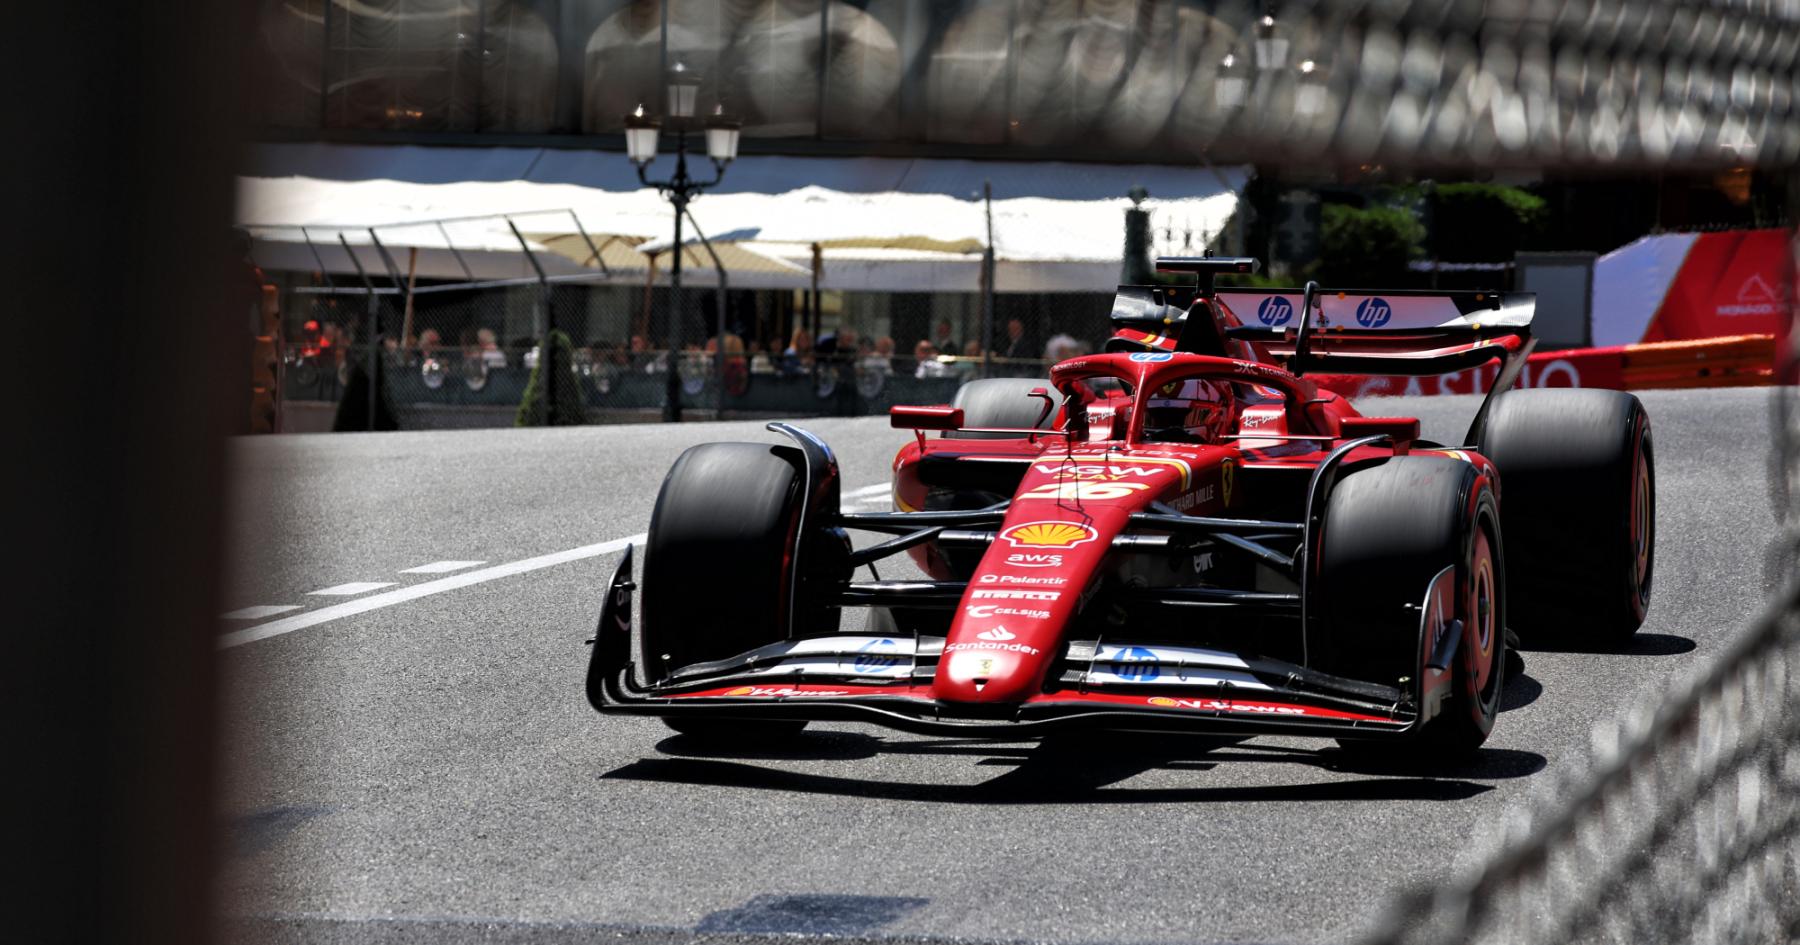 Leclerc Dominates Monaco GP Qualifying with Stunning Pole Position, Verstappen Settles for Sixth Place